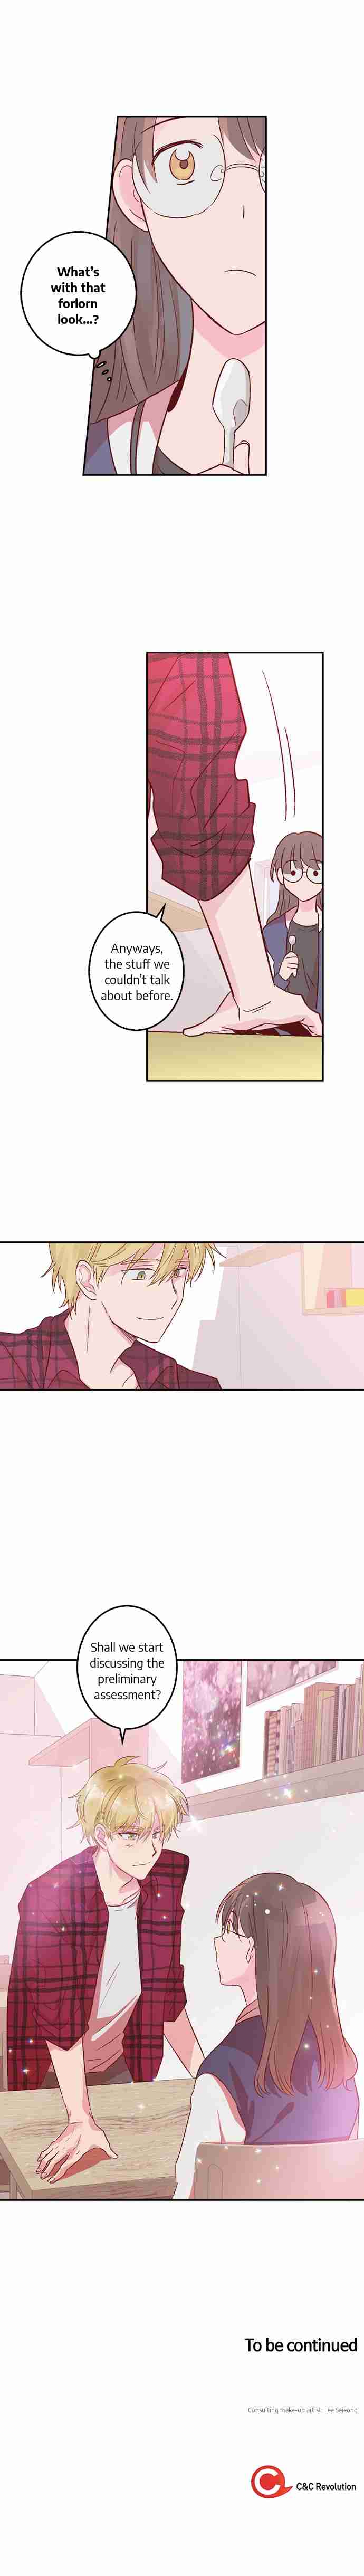 The Man Who Cleans Up Makeup Ch. 4